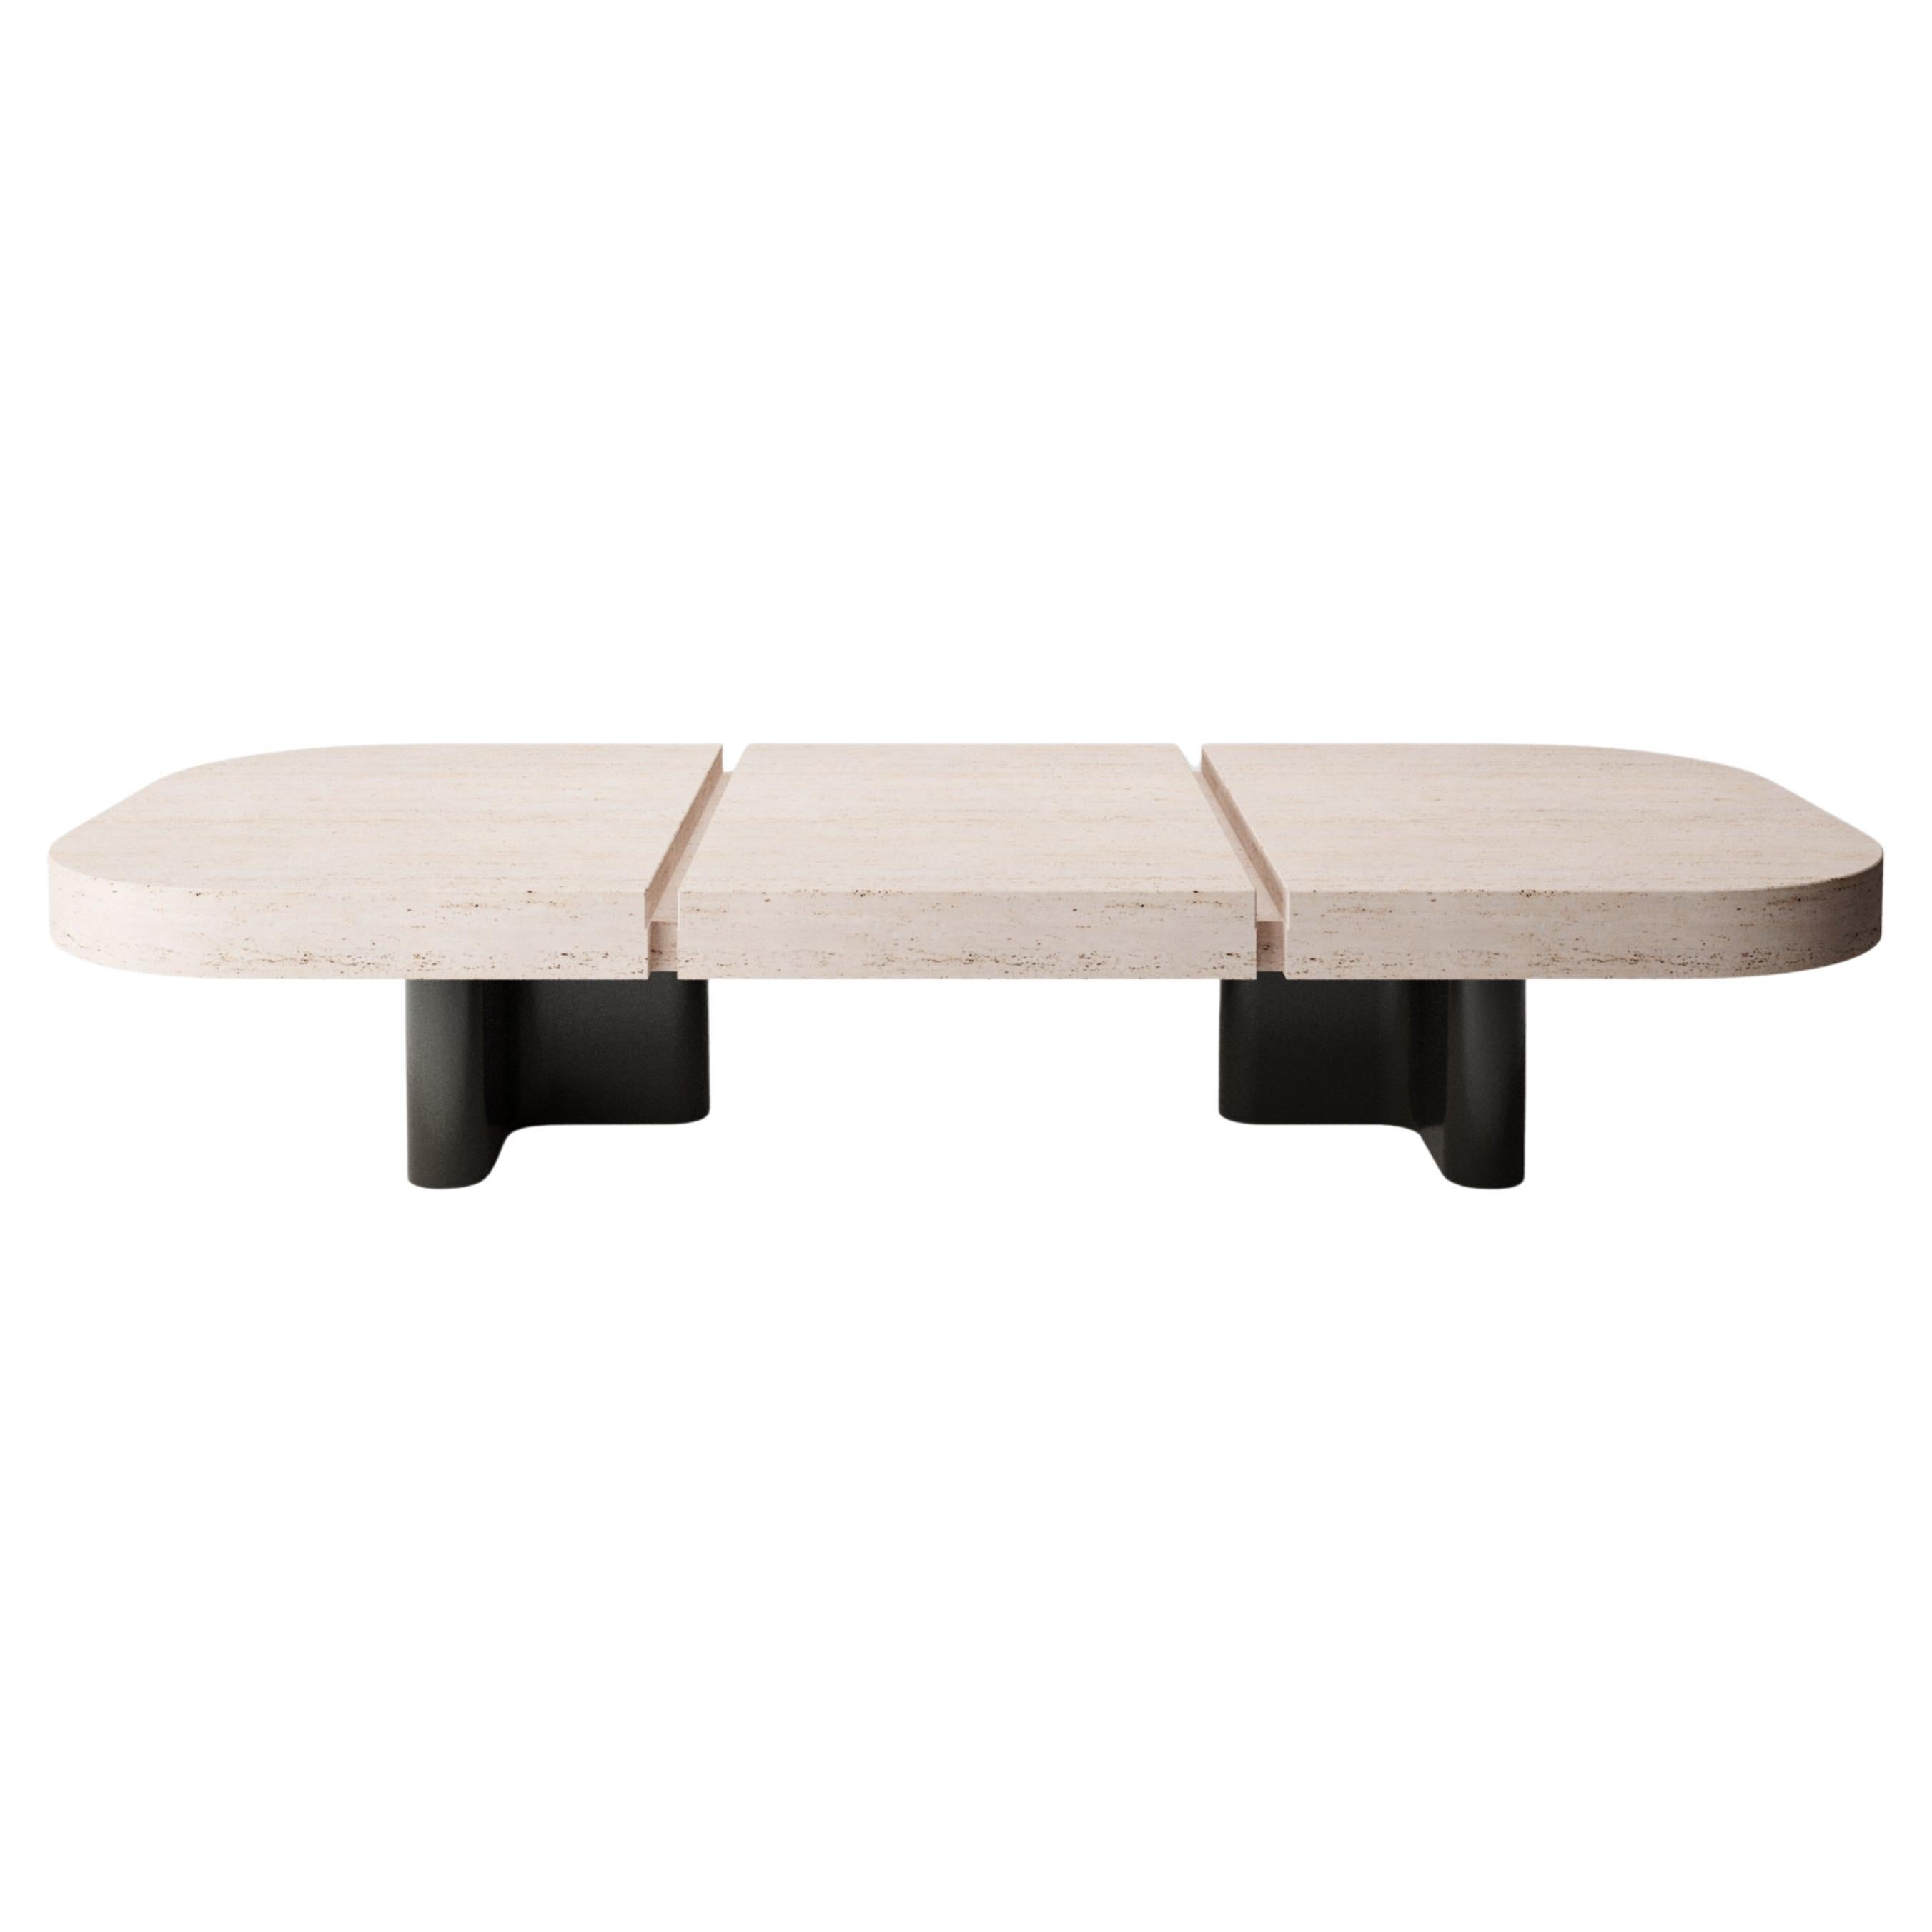 Collector -Designed by Studio Rig Meco Center Table Lackiert und Travertino